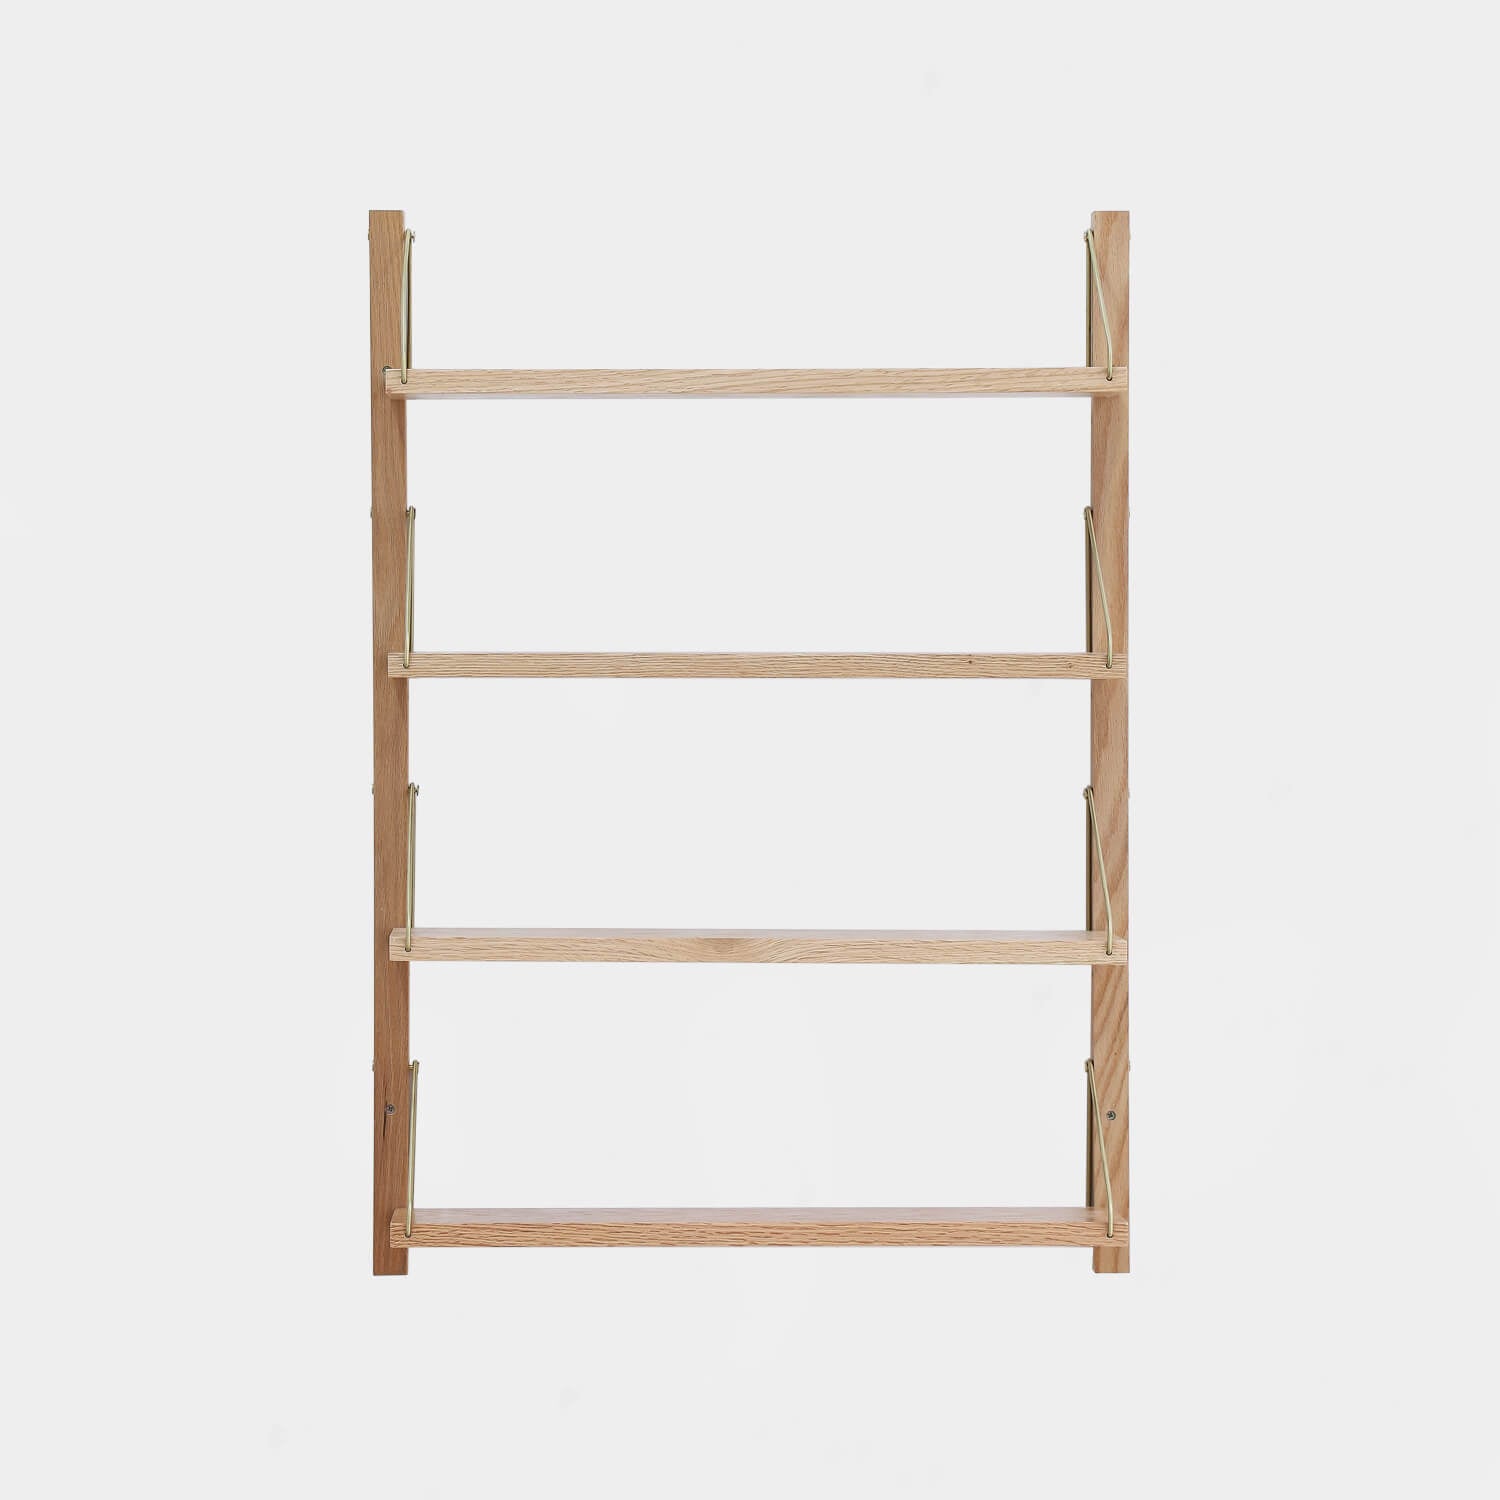 Solid wood Multi-Tier Wall Flexible Display Shelf Unit Rack with natural finish